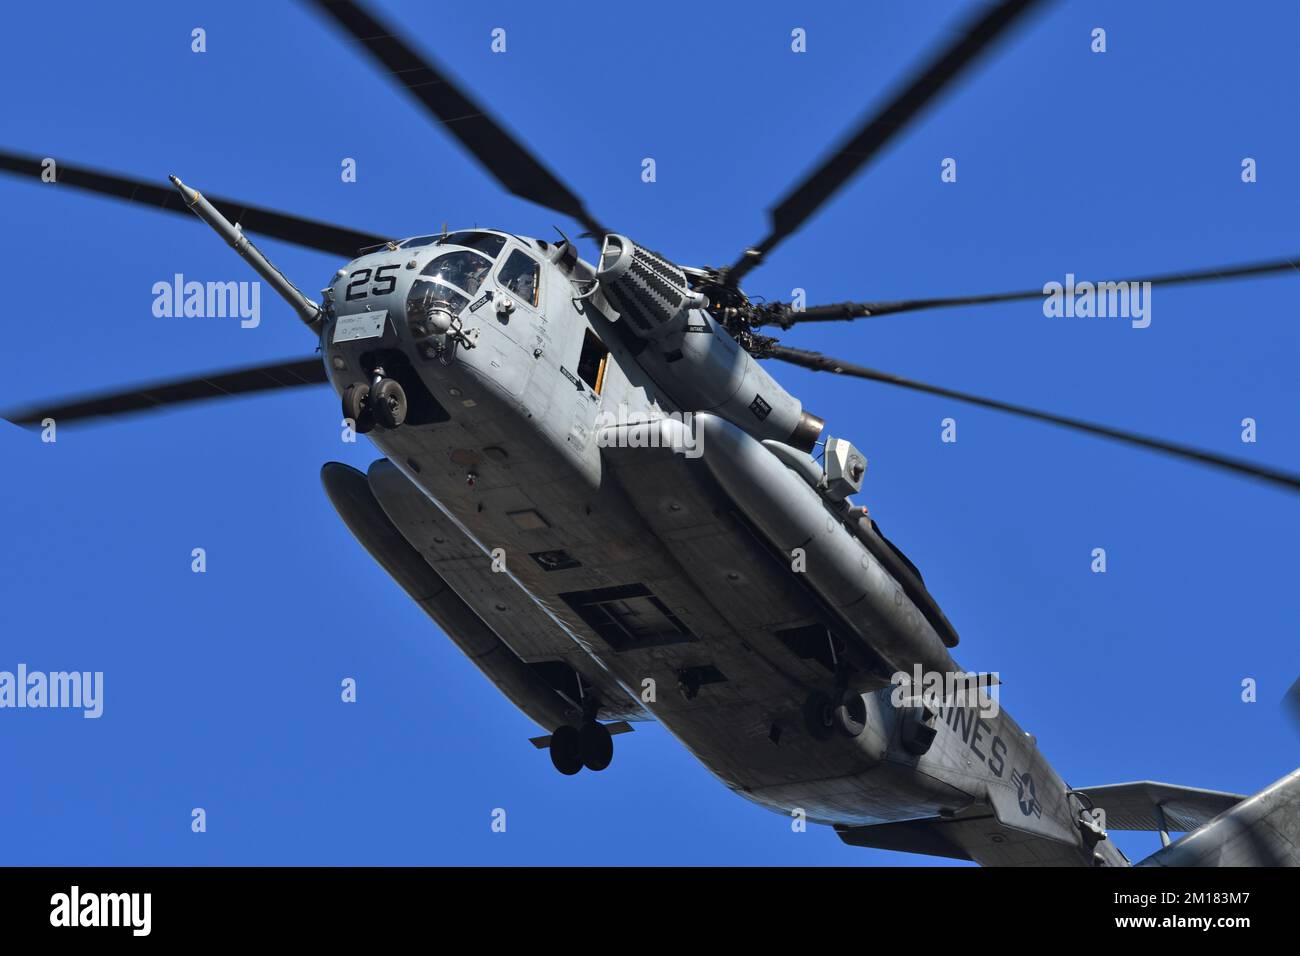 Kanagawa Prefecture, Japan - December 18, 2021: US Marine Corps Sikorsky CH-53E Super Stallion heavy-lift cargo helicopter from HMH-466 Wolfpack. Stock Photo